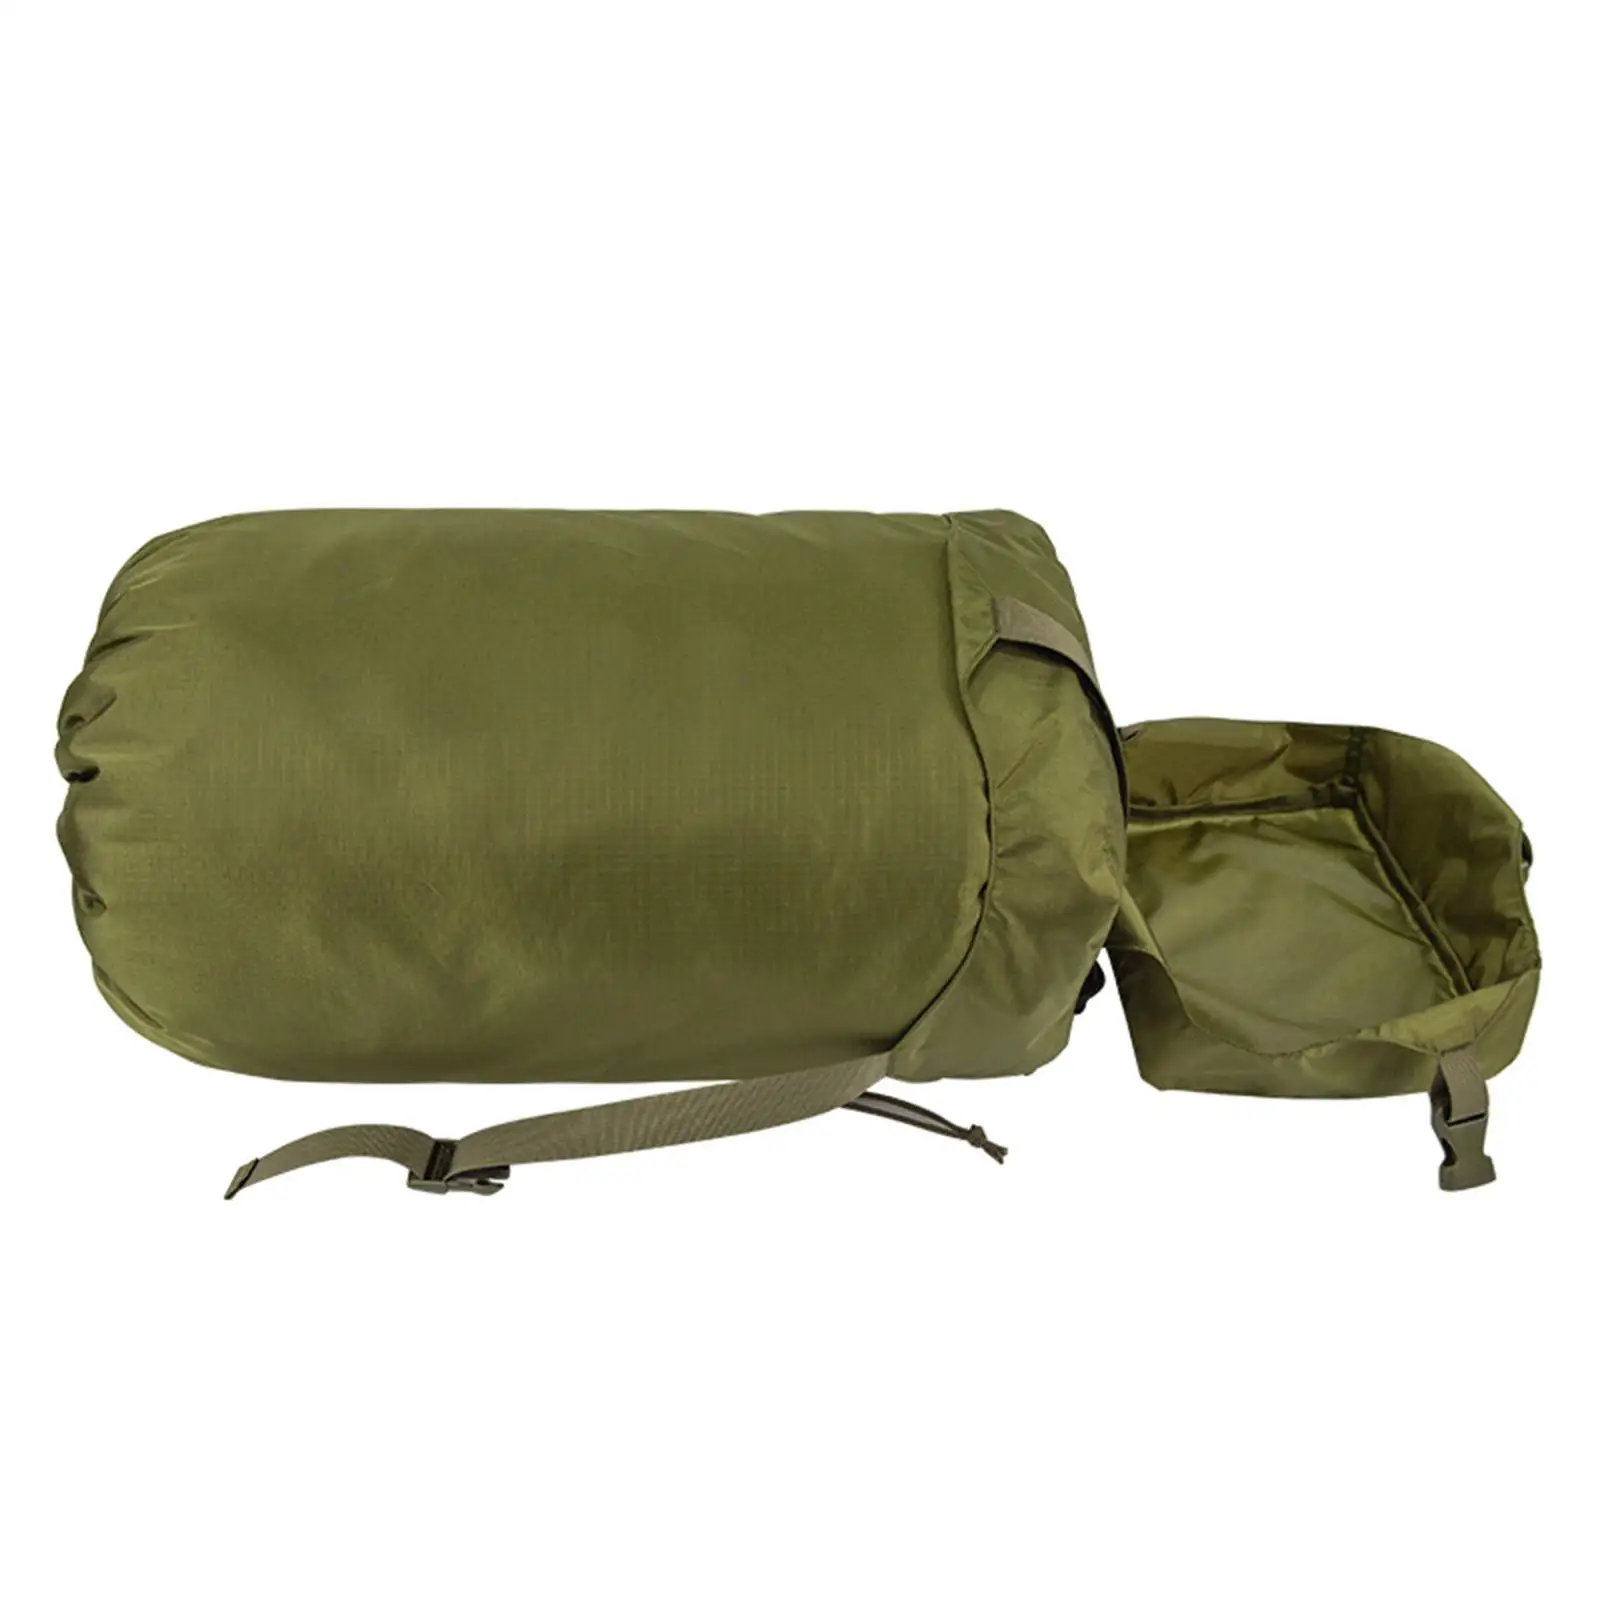 Compression Stuff Sack Portable Multifunctional Waterproof Storage Bag Outdoor Compression Bag for Travel Camping Backpacking